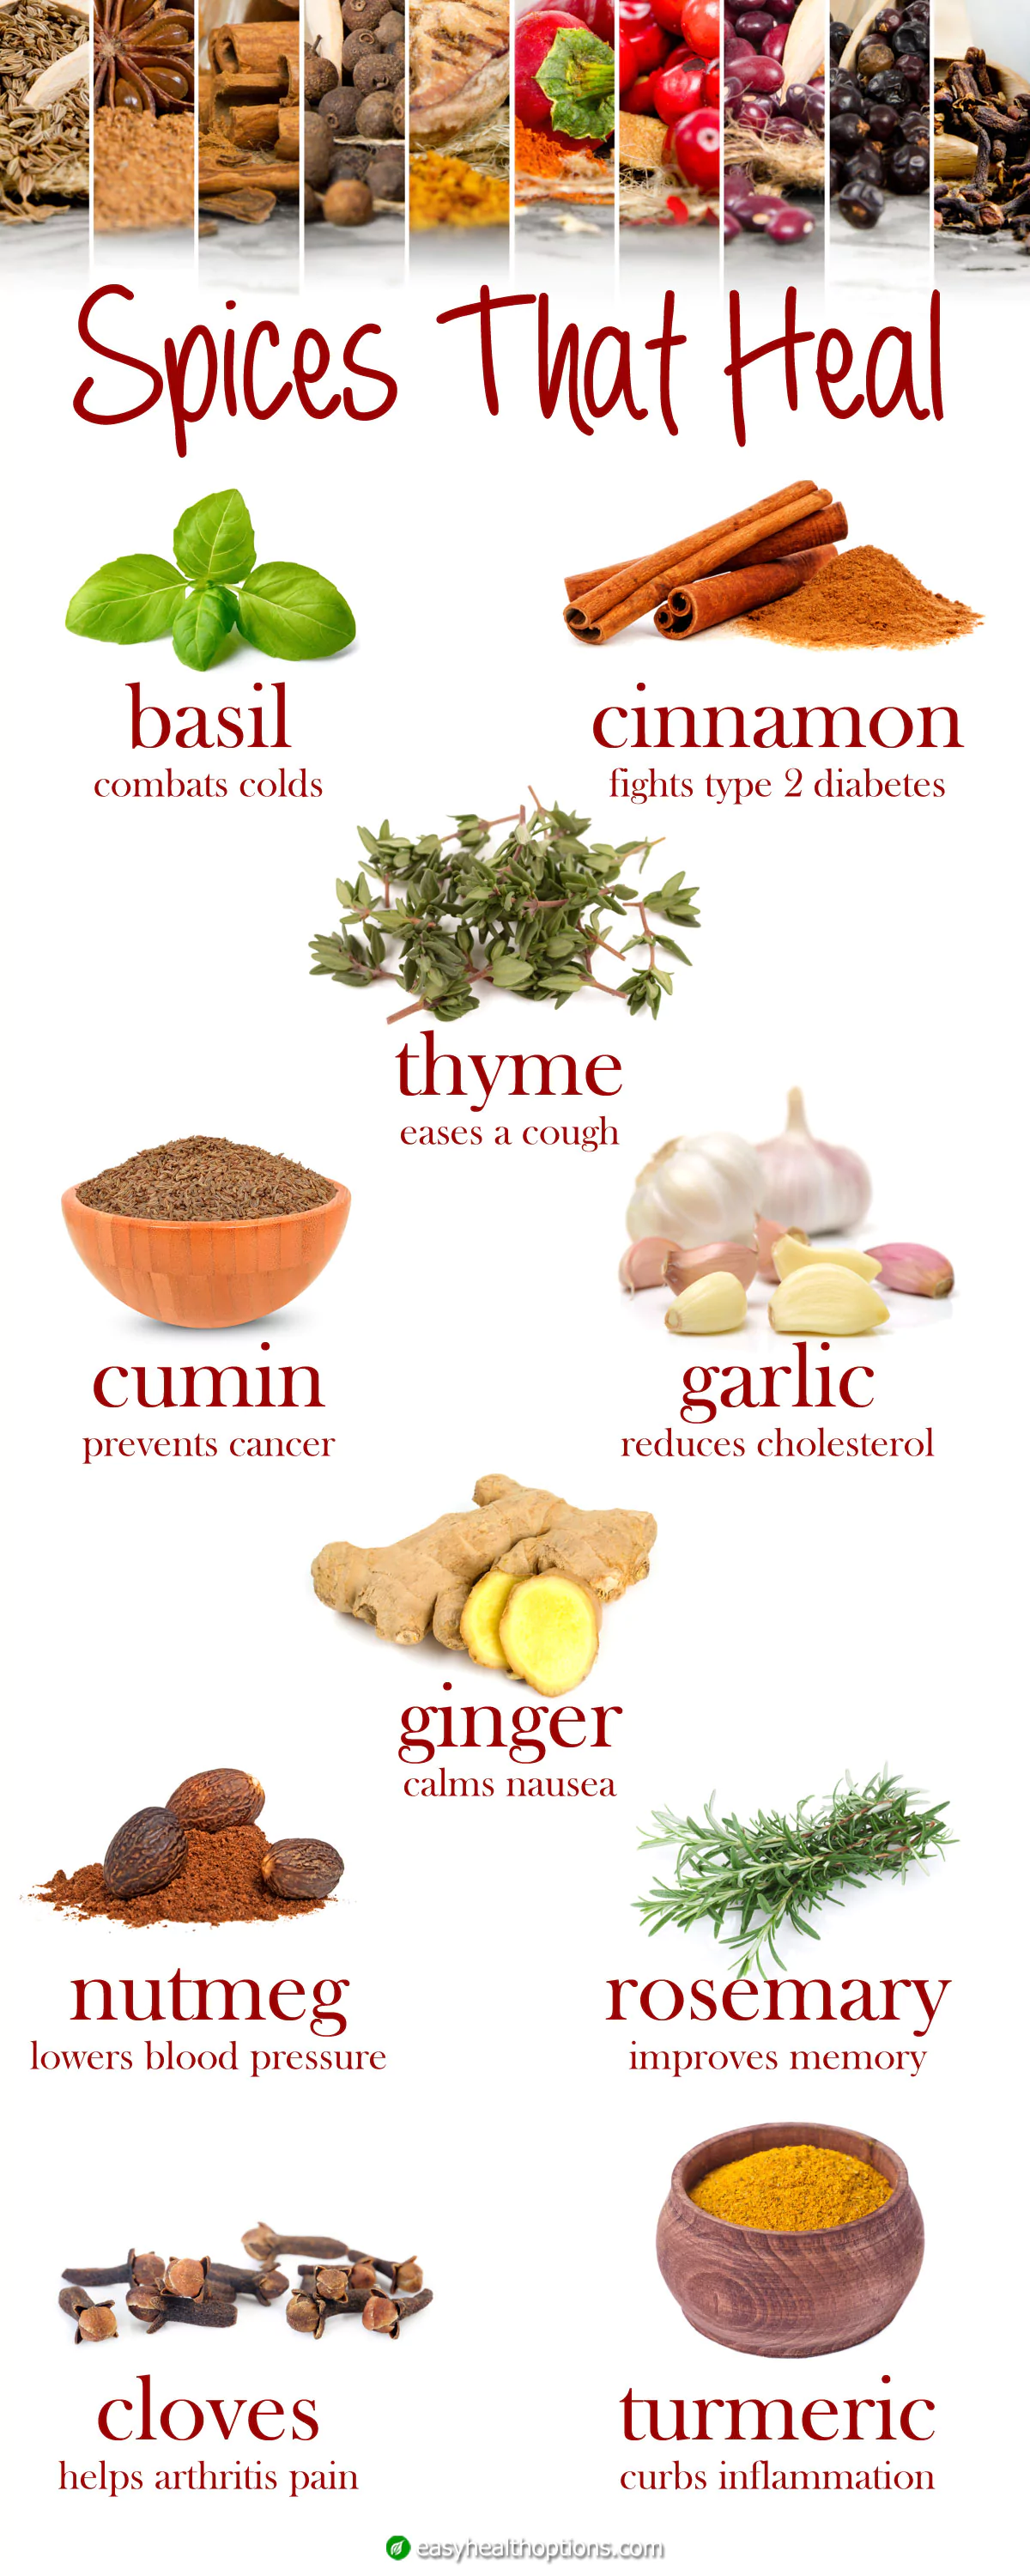 Spices That Heal